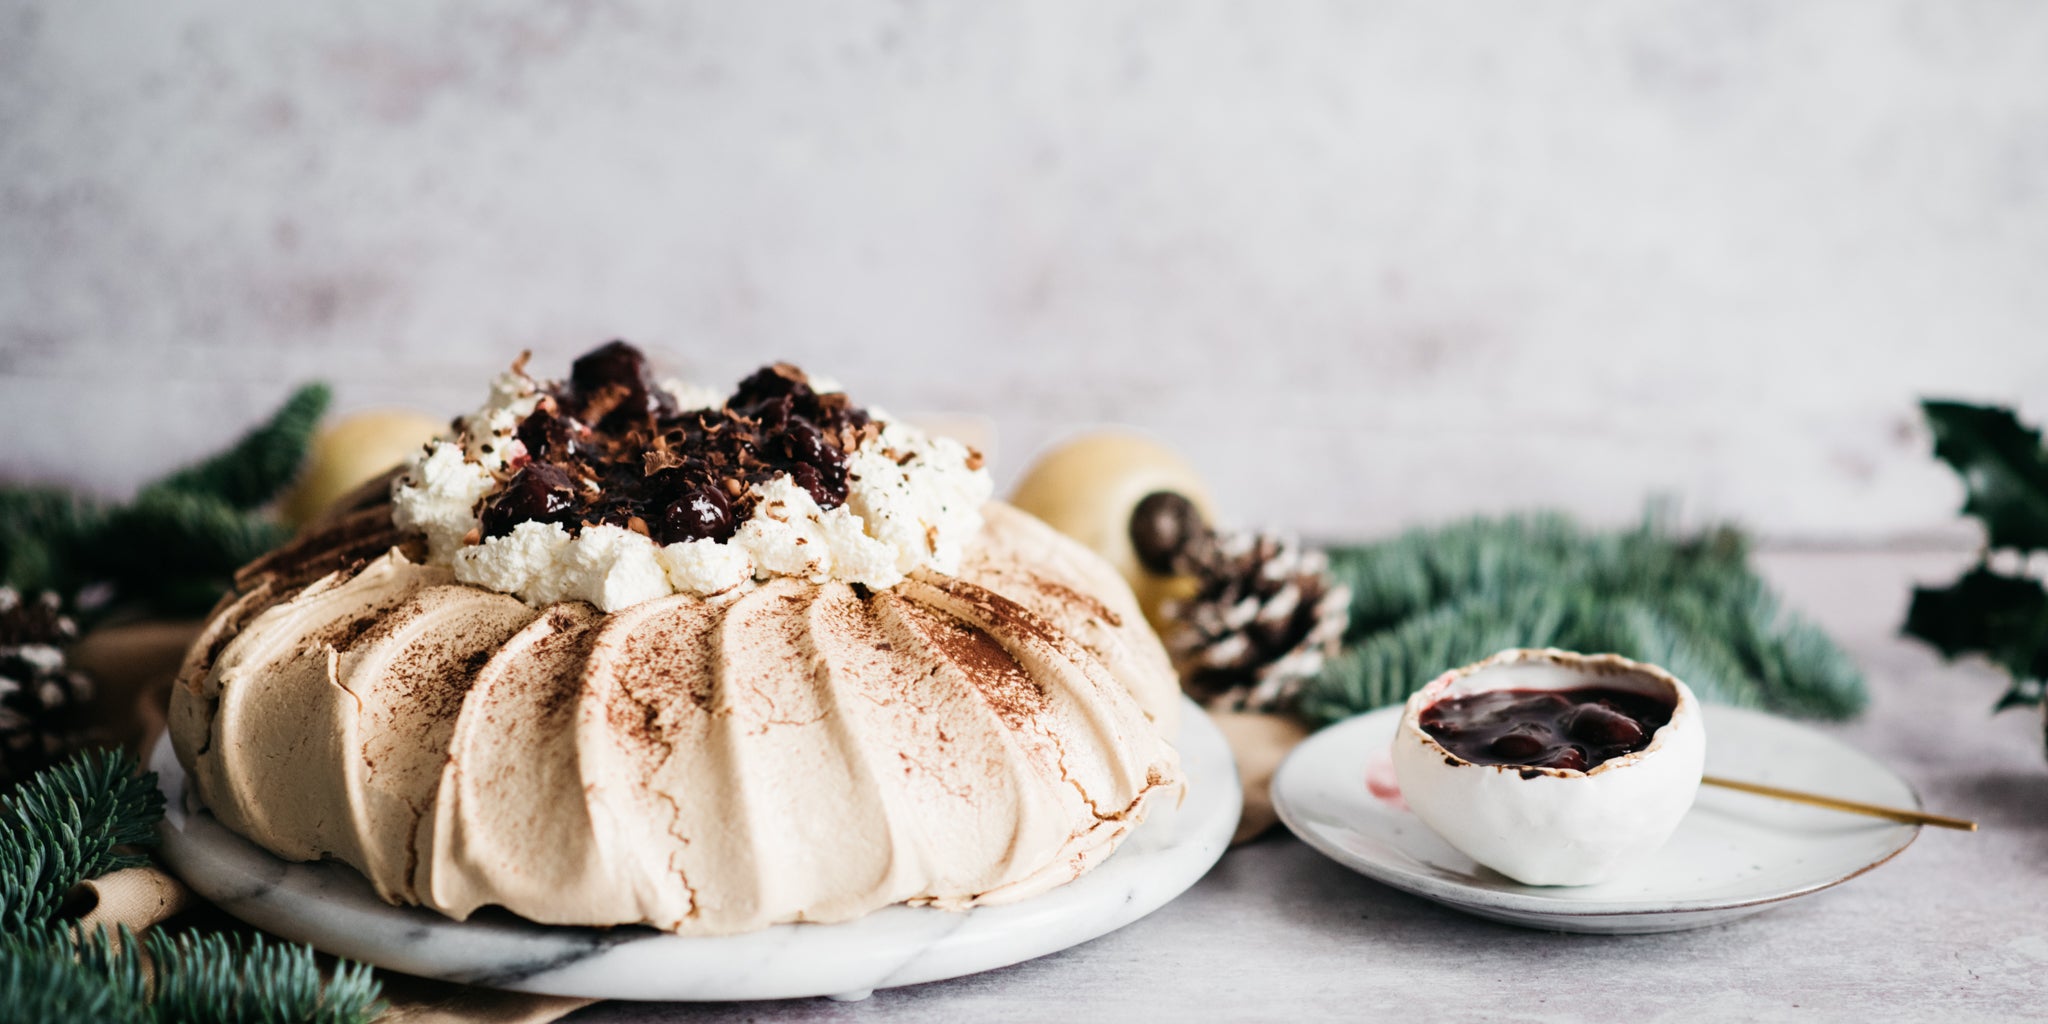 Black Forest Pavlova next to pine cones and leaves, with a bowl of cherry kirsch